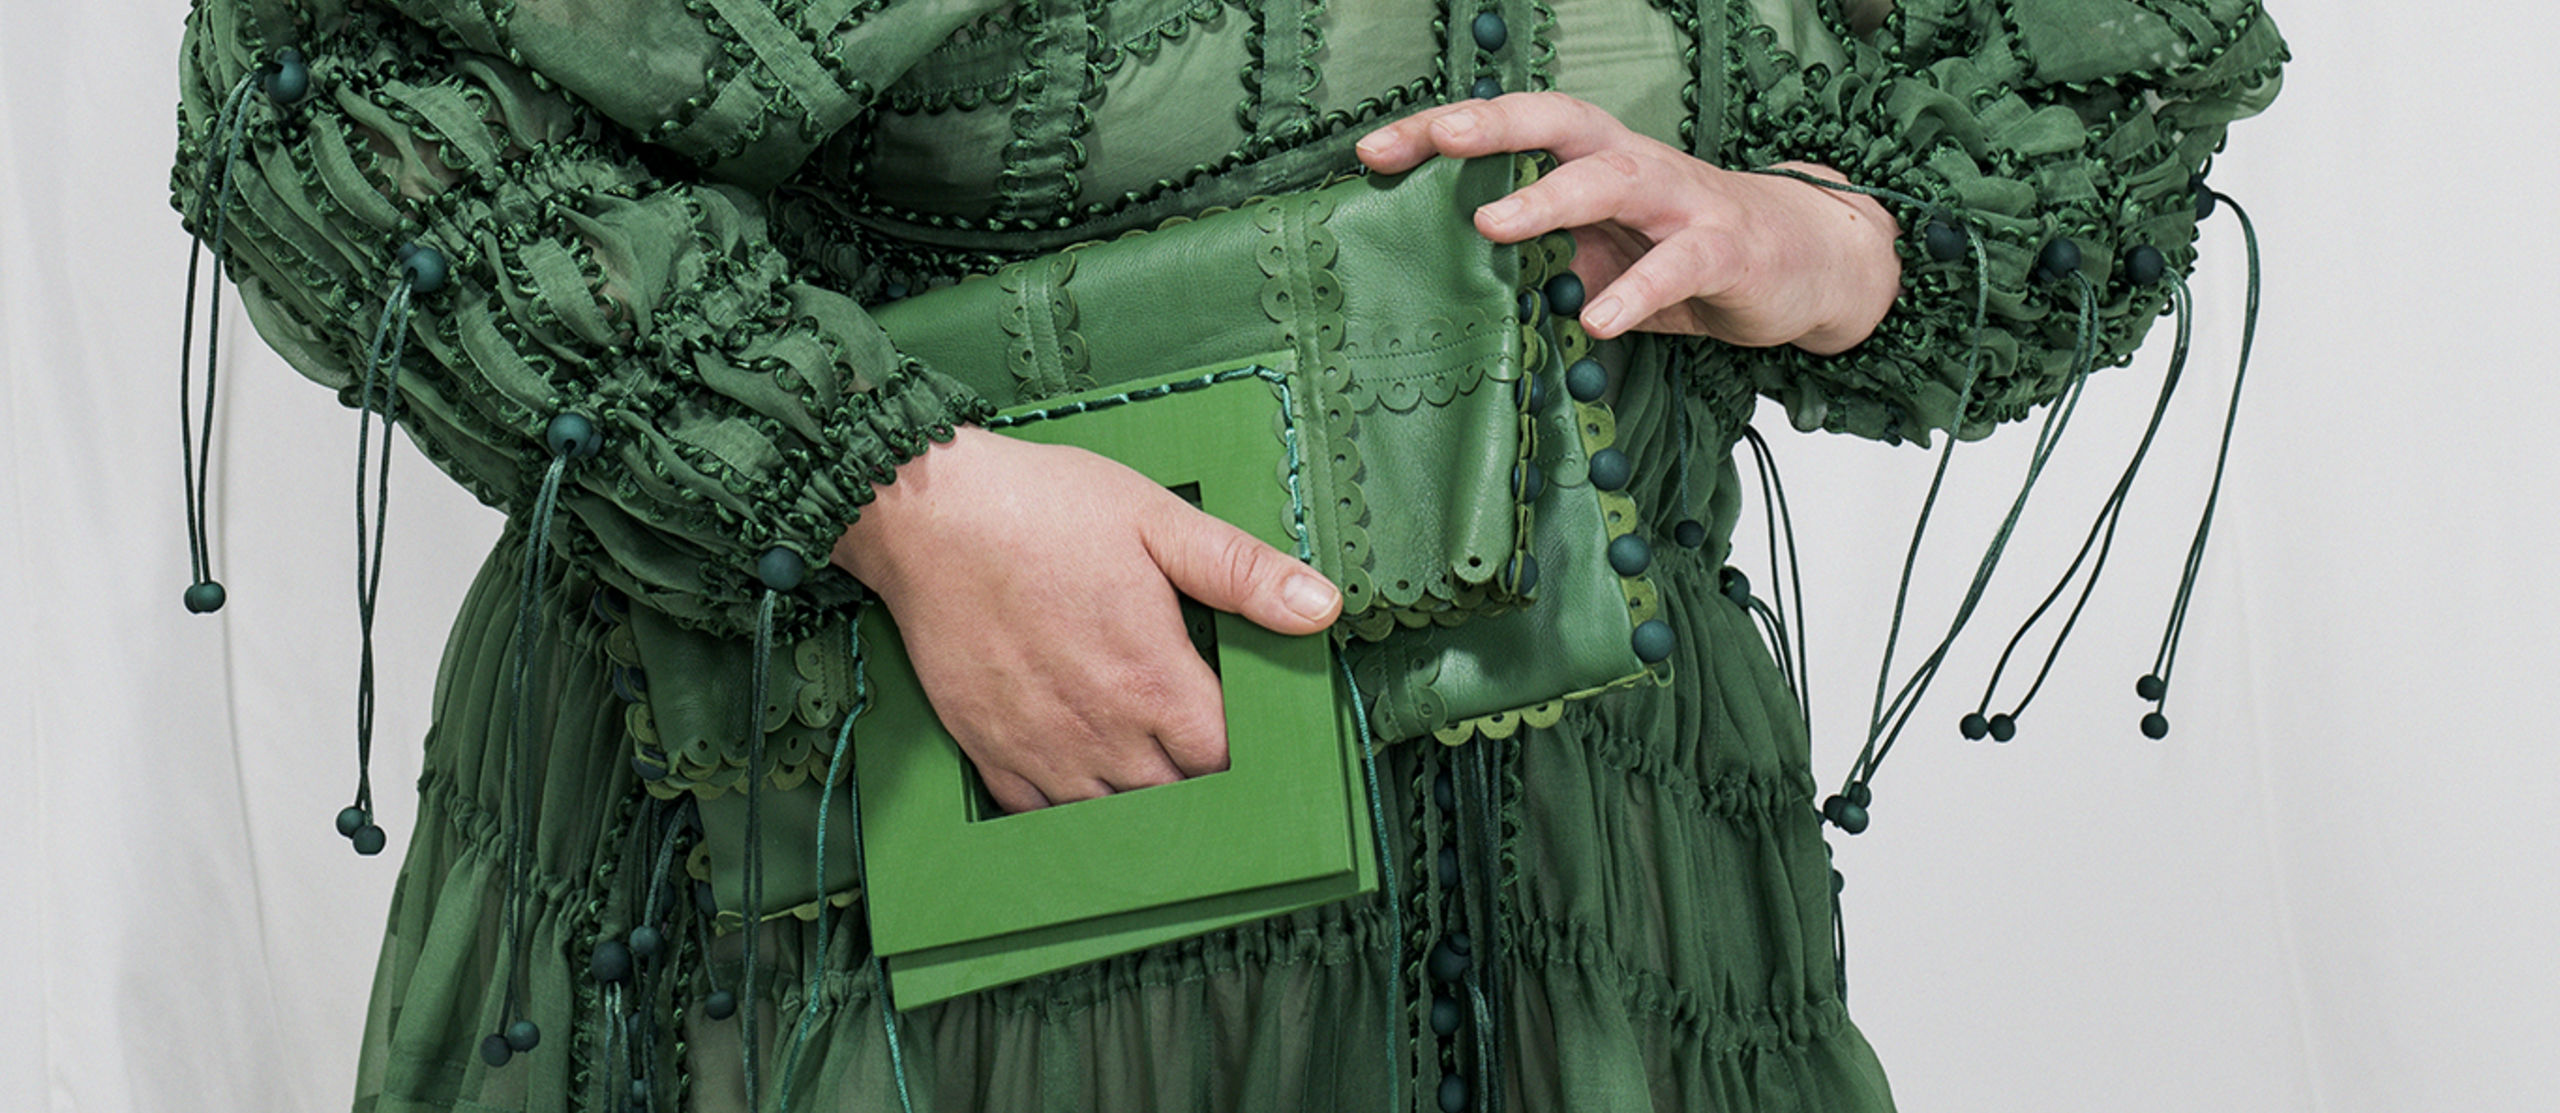 A hand holding green purse on top of a green dress